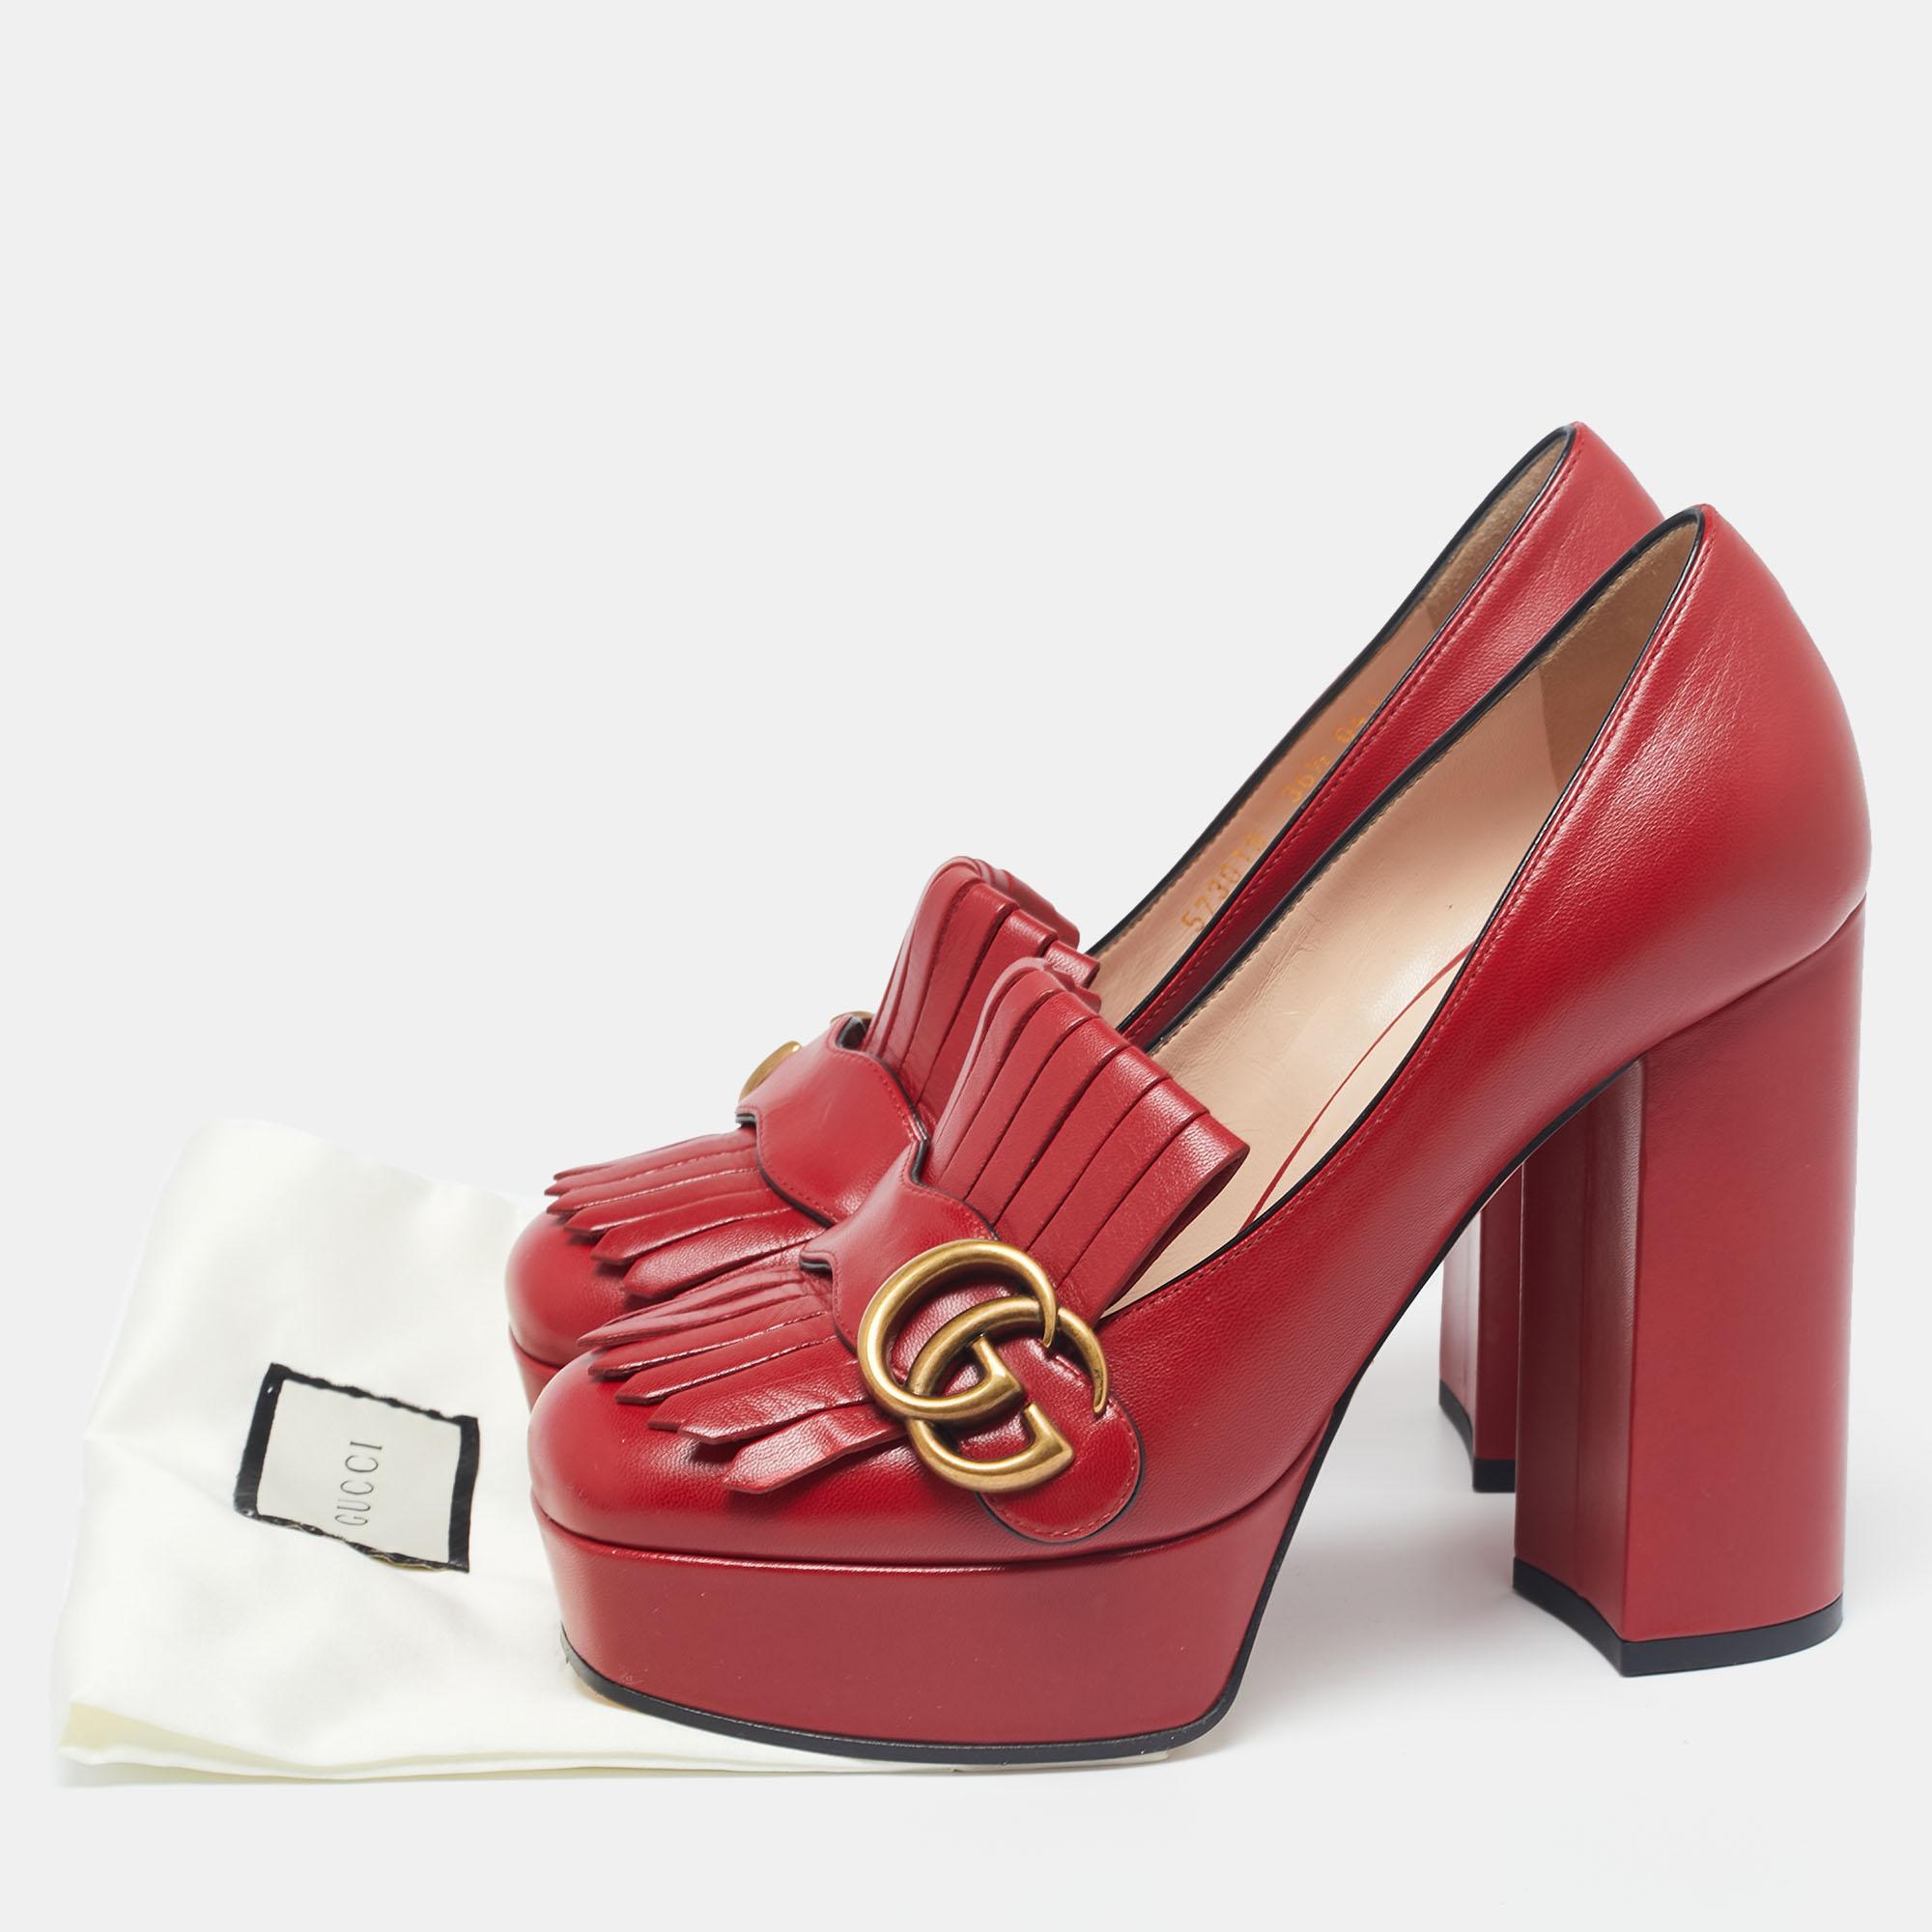 Pretty and easy to flaunt, this pair of GG Marmont pumps by Gucci is a stunner. They've been crafted from red leather and styled with folded fringes with the brand's signature GG logo on the uppers. Round toes, low block heels, and sturdy leather